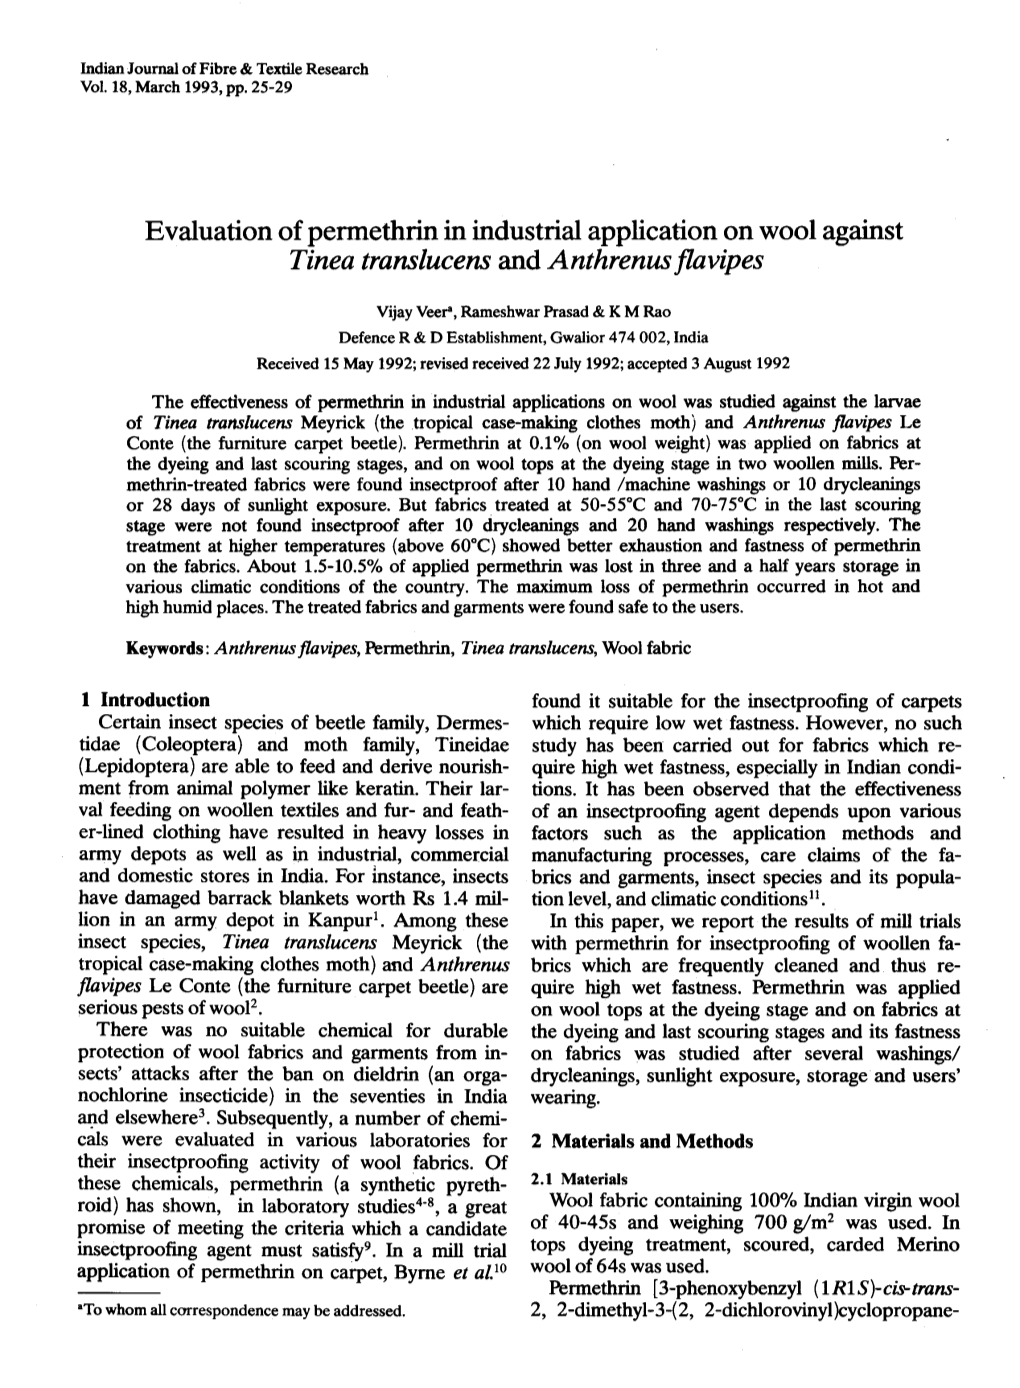 Evaluation of Permethrin in Industrial Application on Wool Against Tinea Trans/Ucens and Anthrenus Flavipes